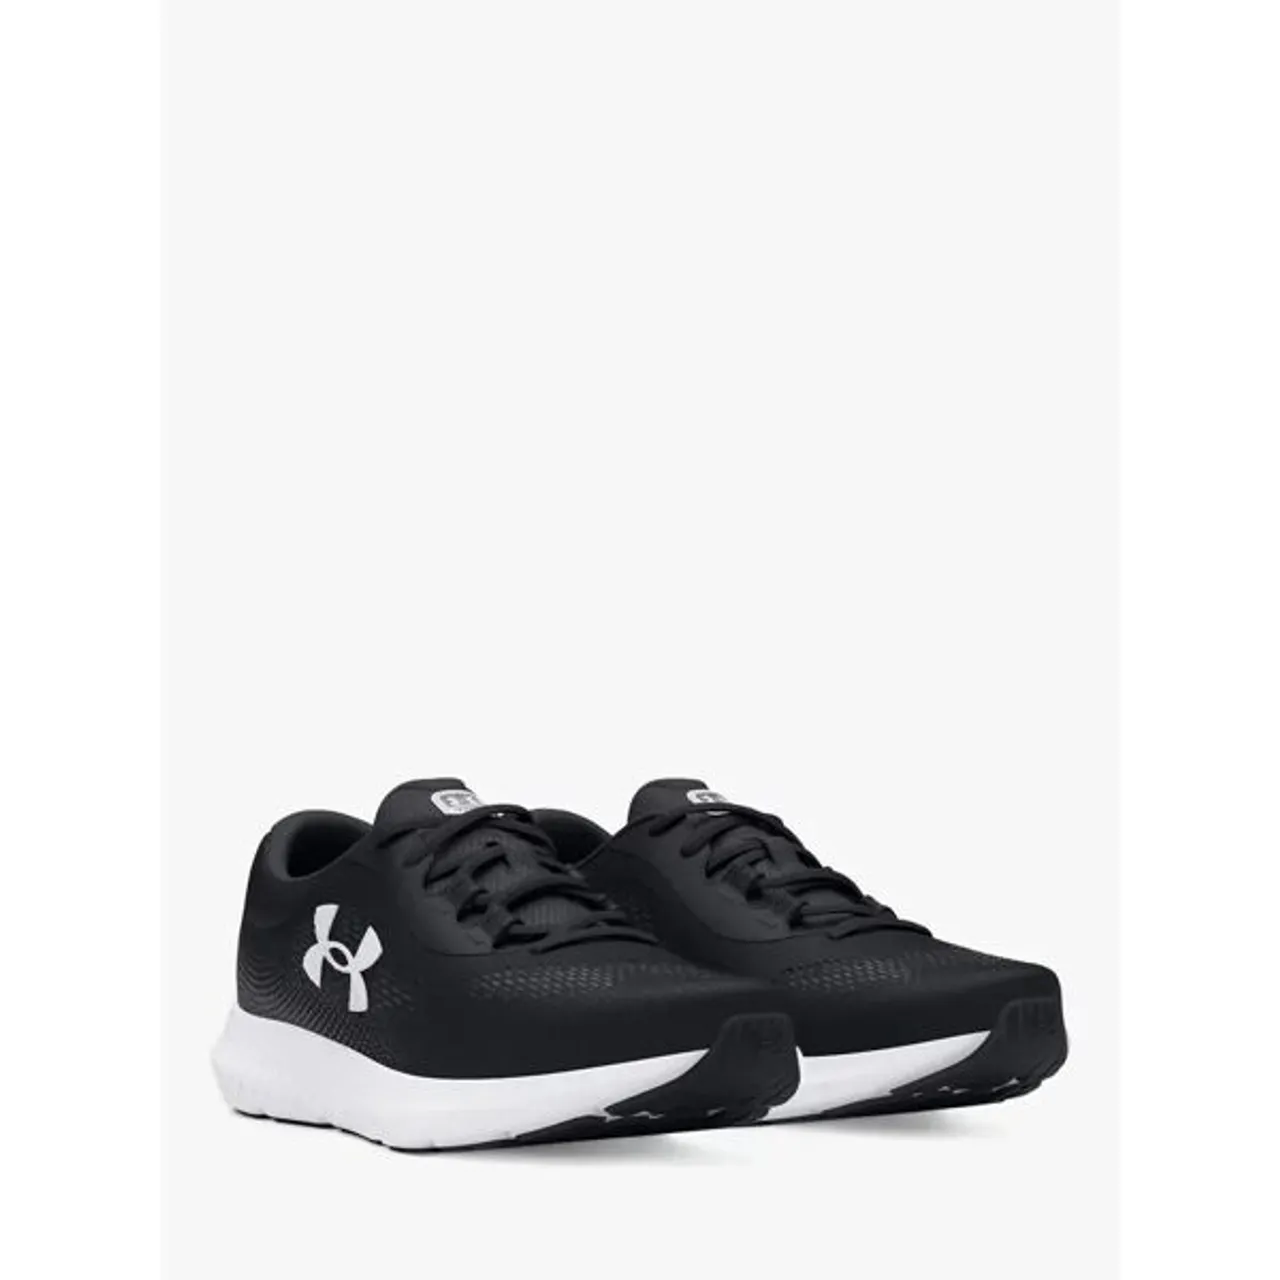 Under Armour Rogue 4 Women's Running Shoes - Black  / White - Female